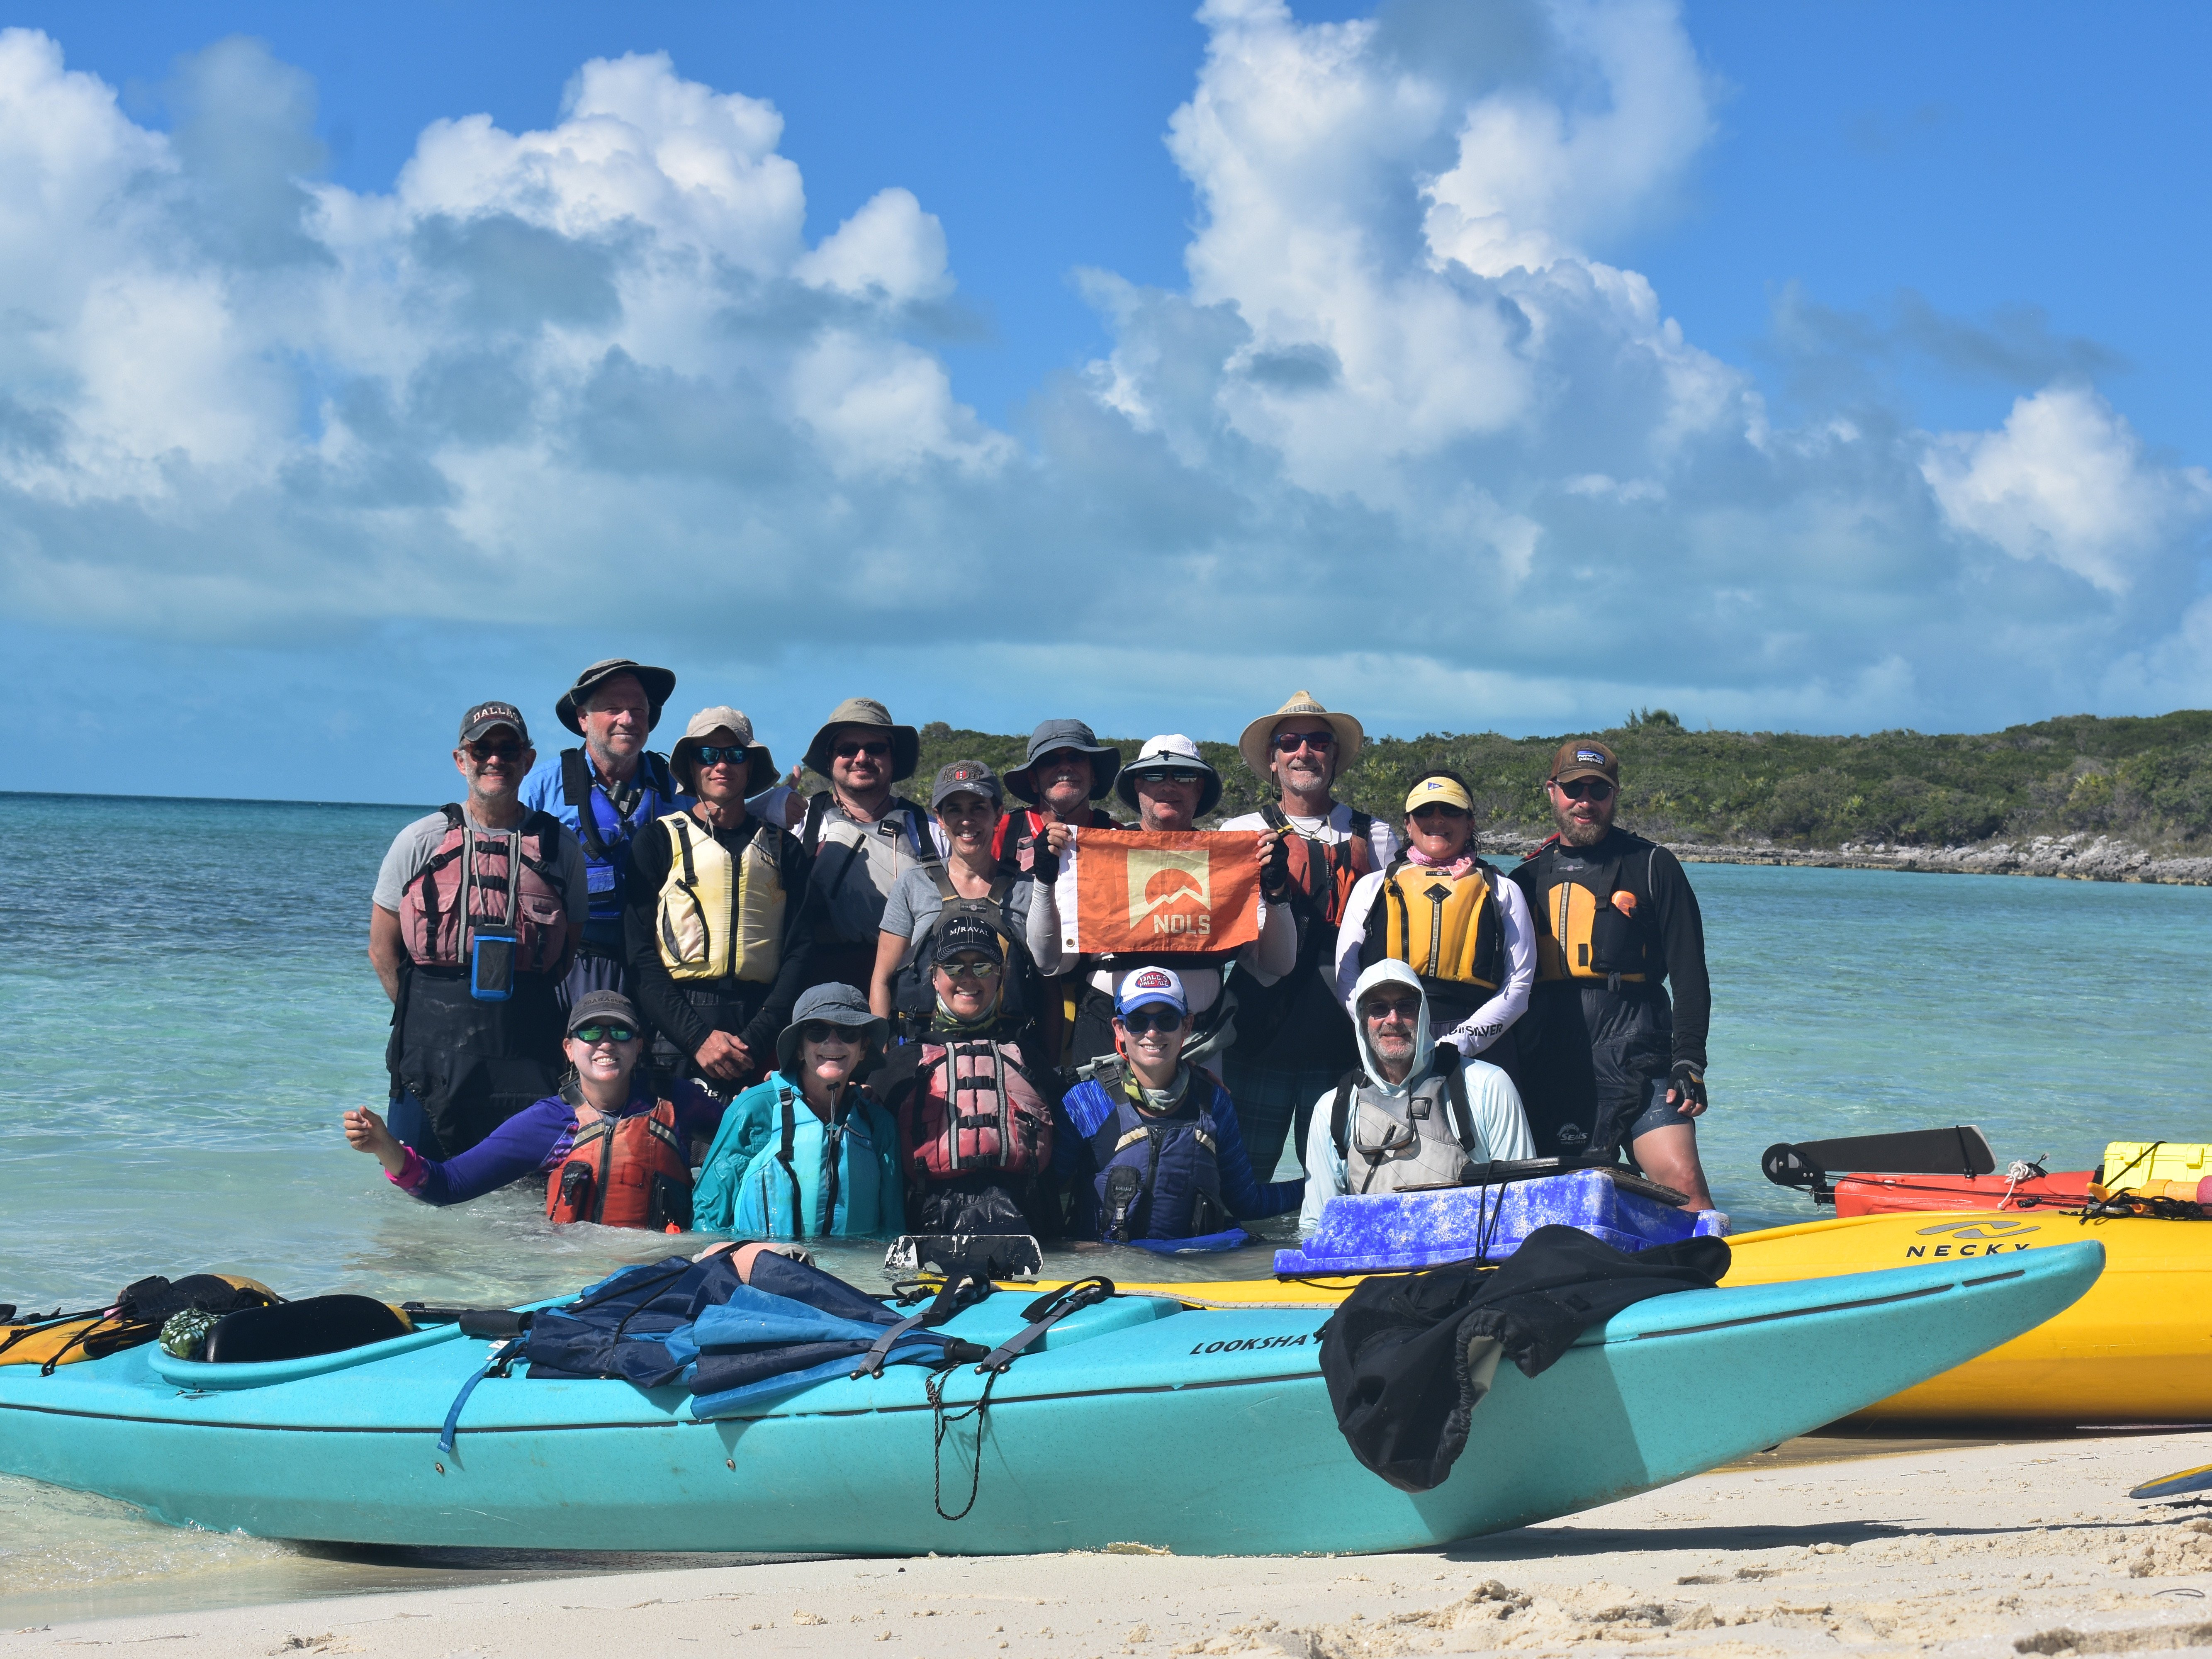 15 NOLS alumni students holding a NOLS flag while standing in the water on a beach in front of their kayaks.